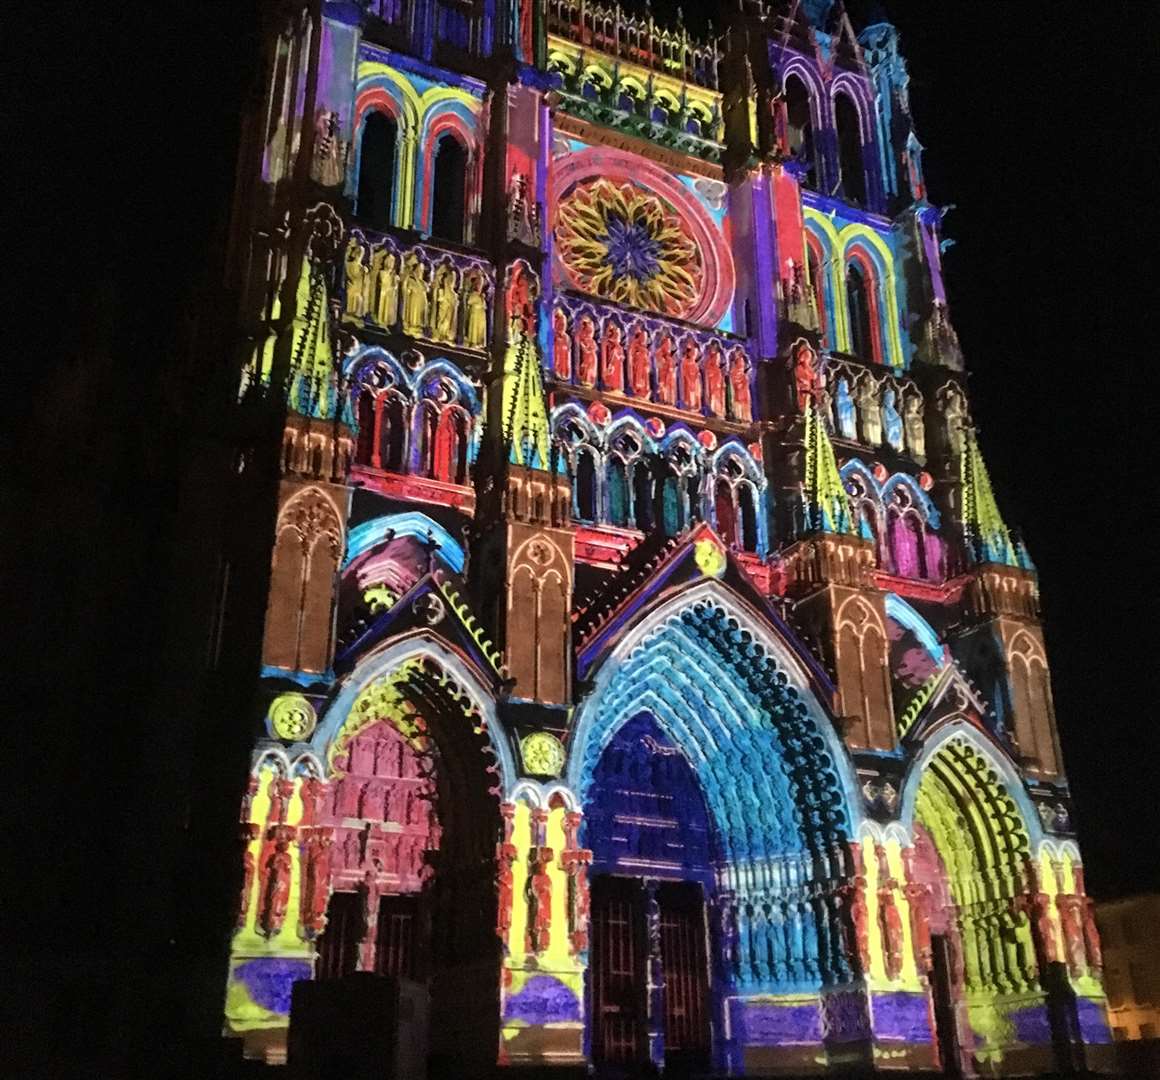 The light show at the cathedral has been described as a truly amazing and magical display of illuminations and will be running nightly from Friday, November 23 (from 7pm) until the end of December.